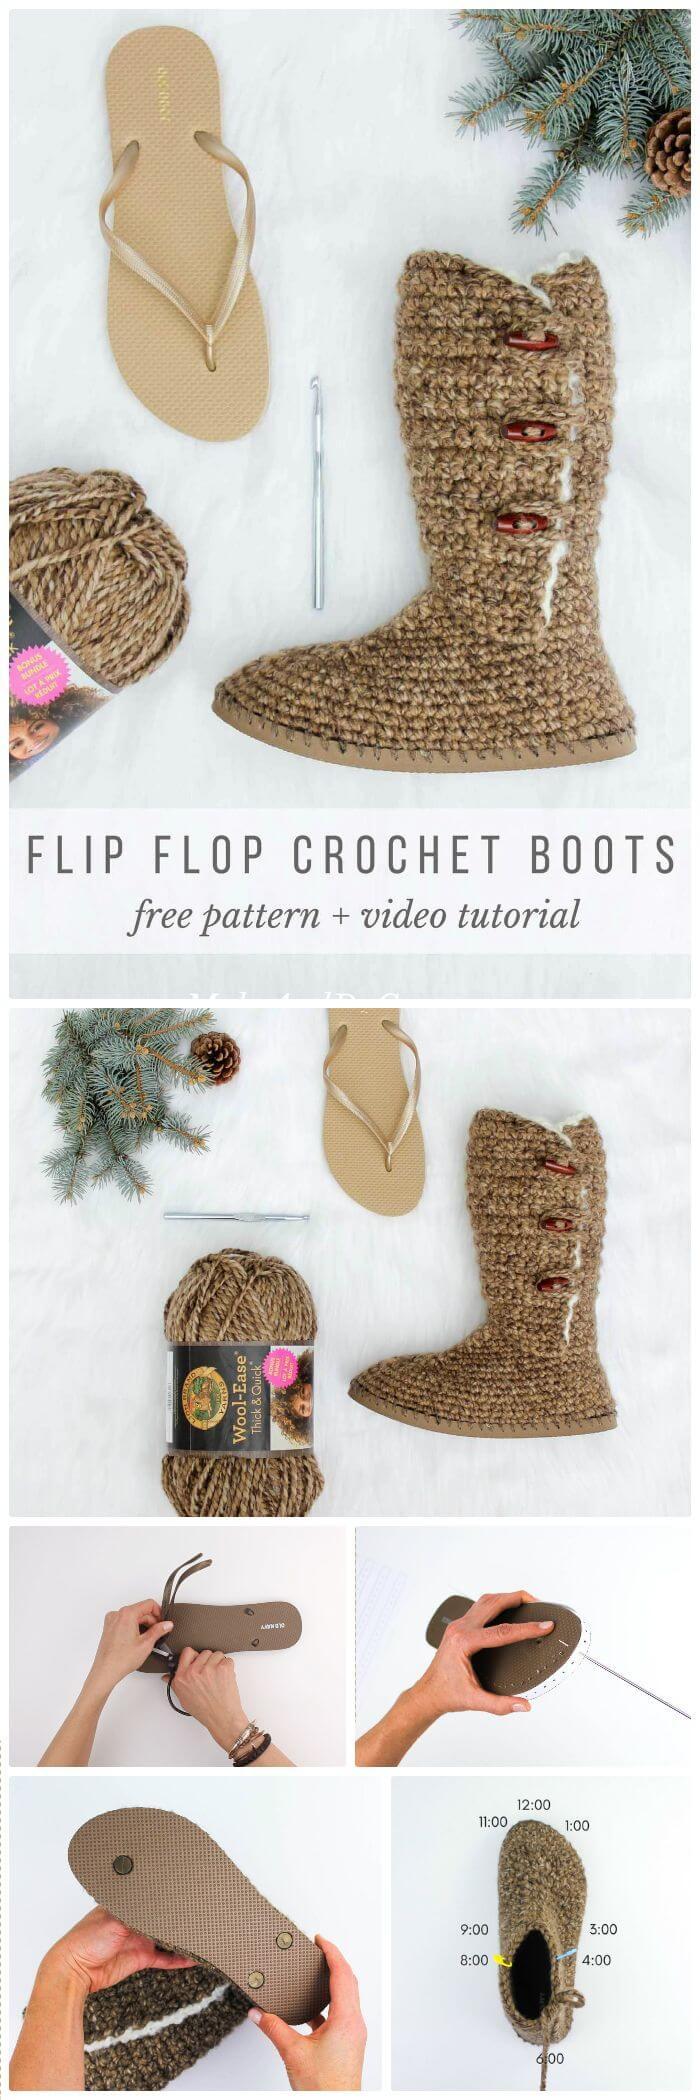 Knitting Patterns For Slipper Boots 22 Crochet Slippers Boot Shoes Flip Flops Free Patterns